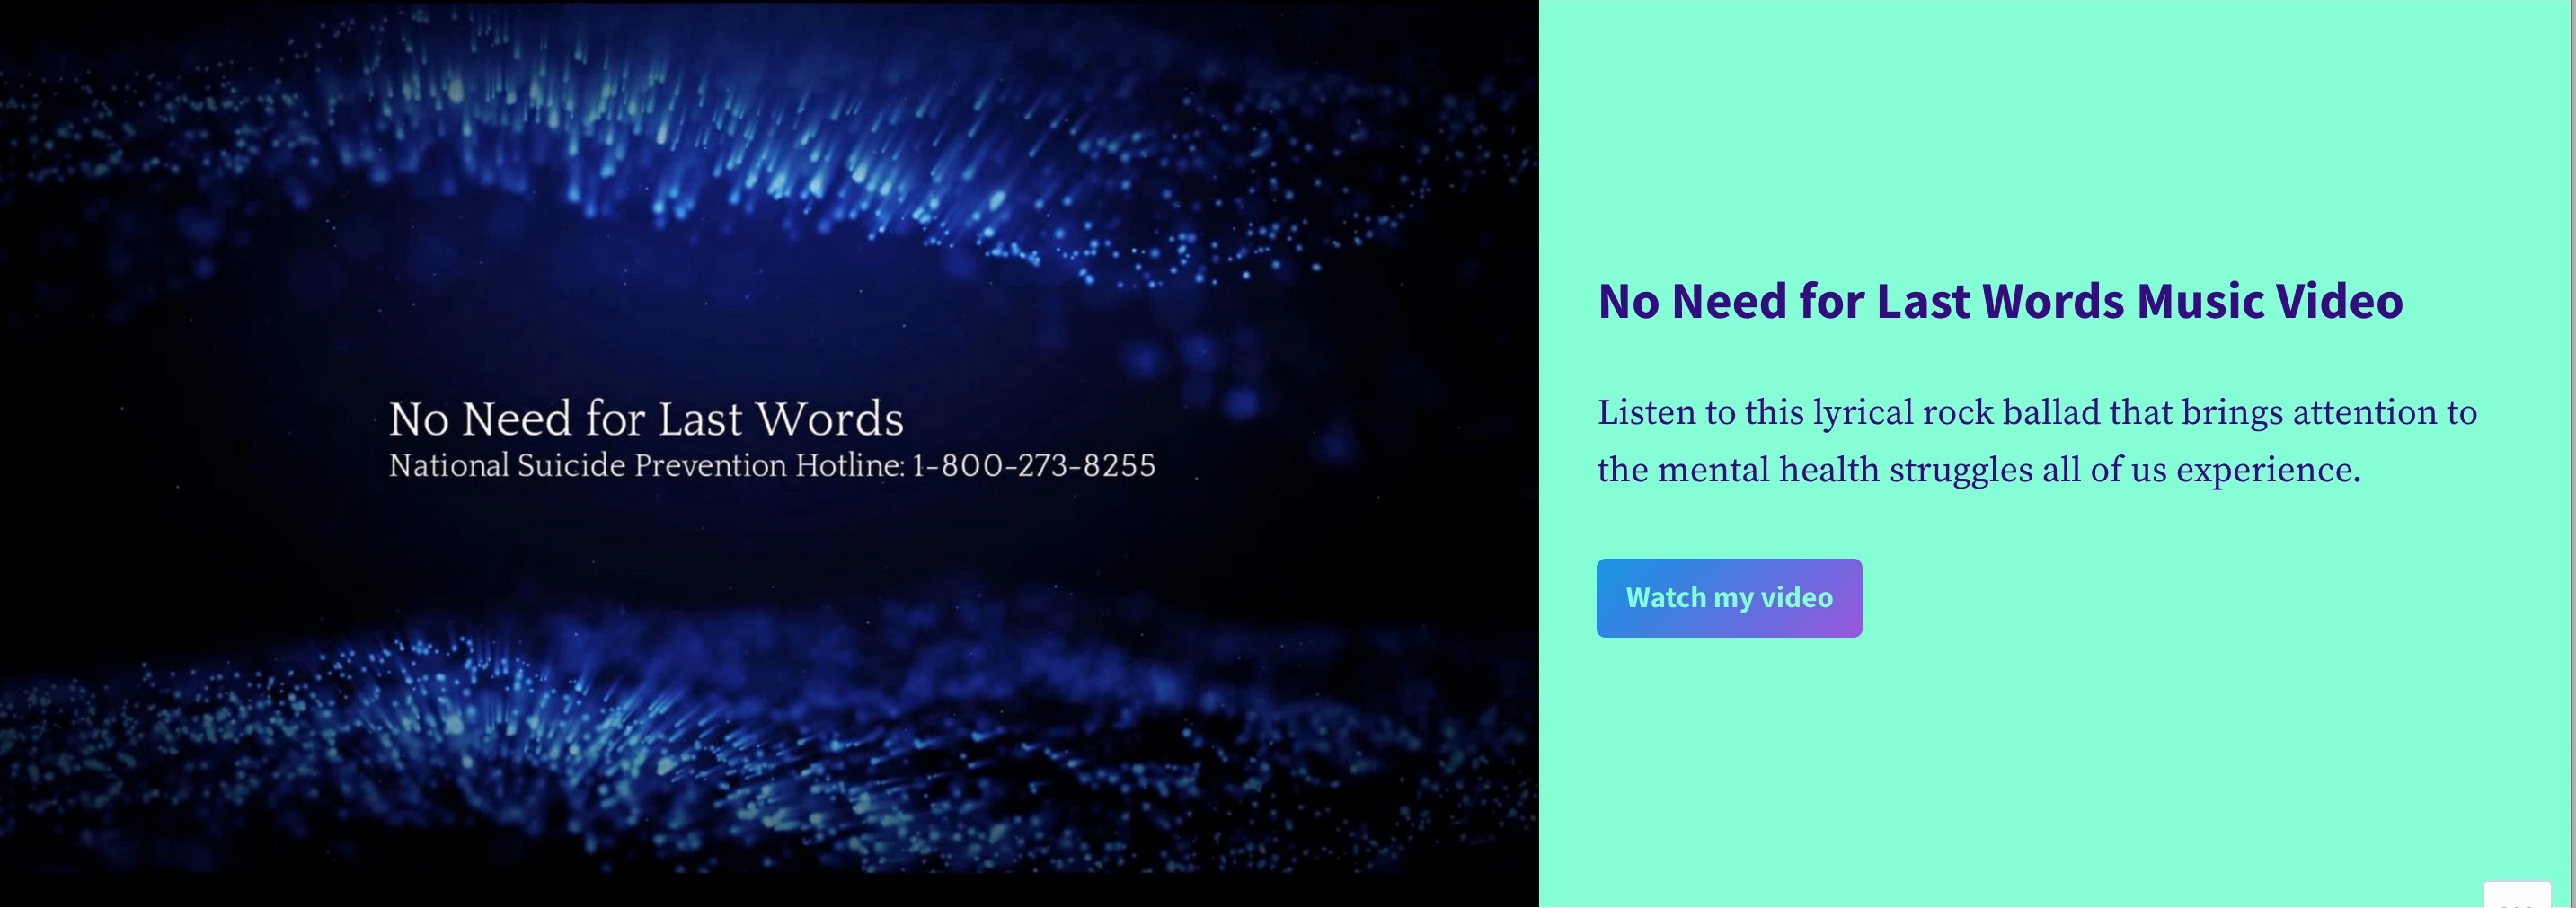 Screenshot of website introducing No Need For Last Words Music Video with National Suicide Prevention Hotline # 1-800-273-8255